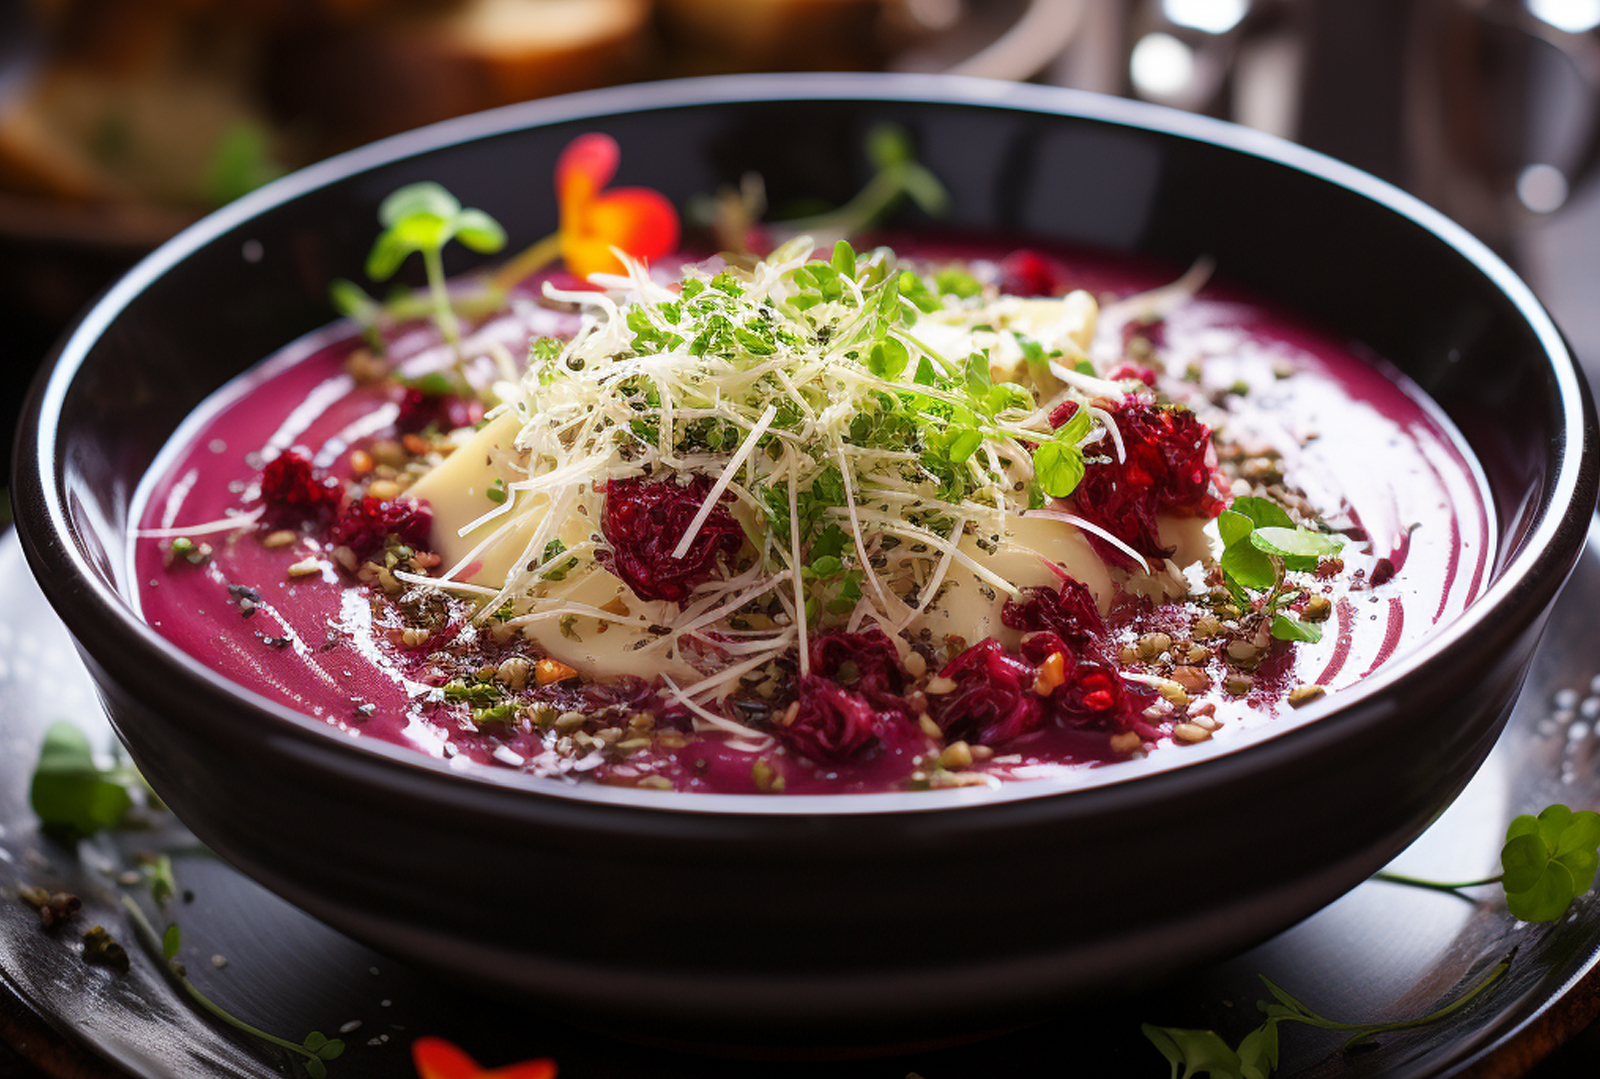 Beetroot Soup with Chili and Sprouts